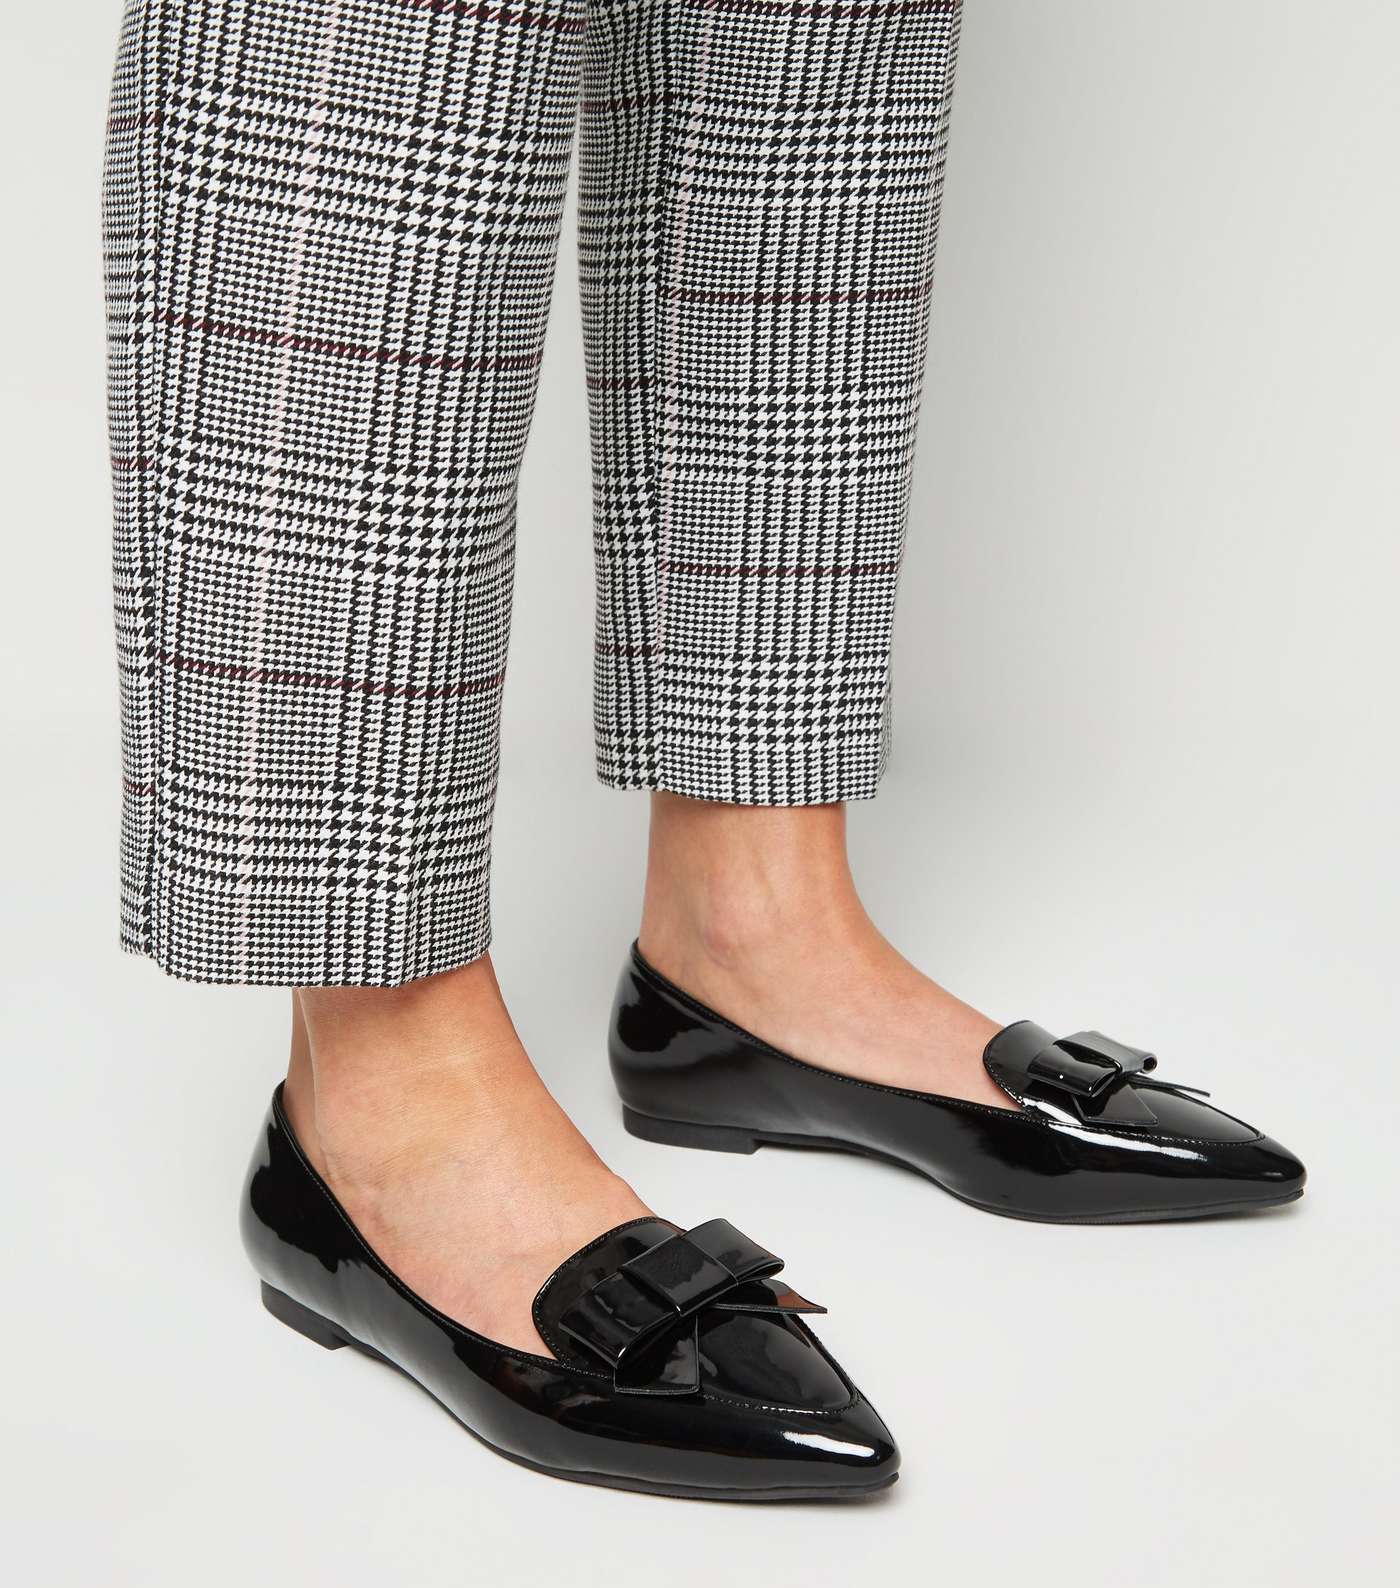 Black Patent Bow Pointed Toe Loafers Image 2